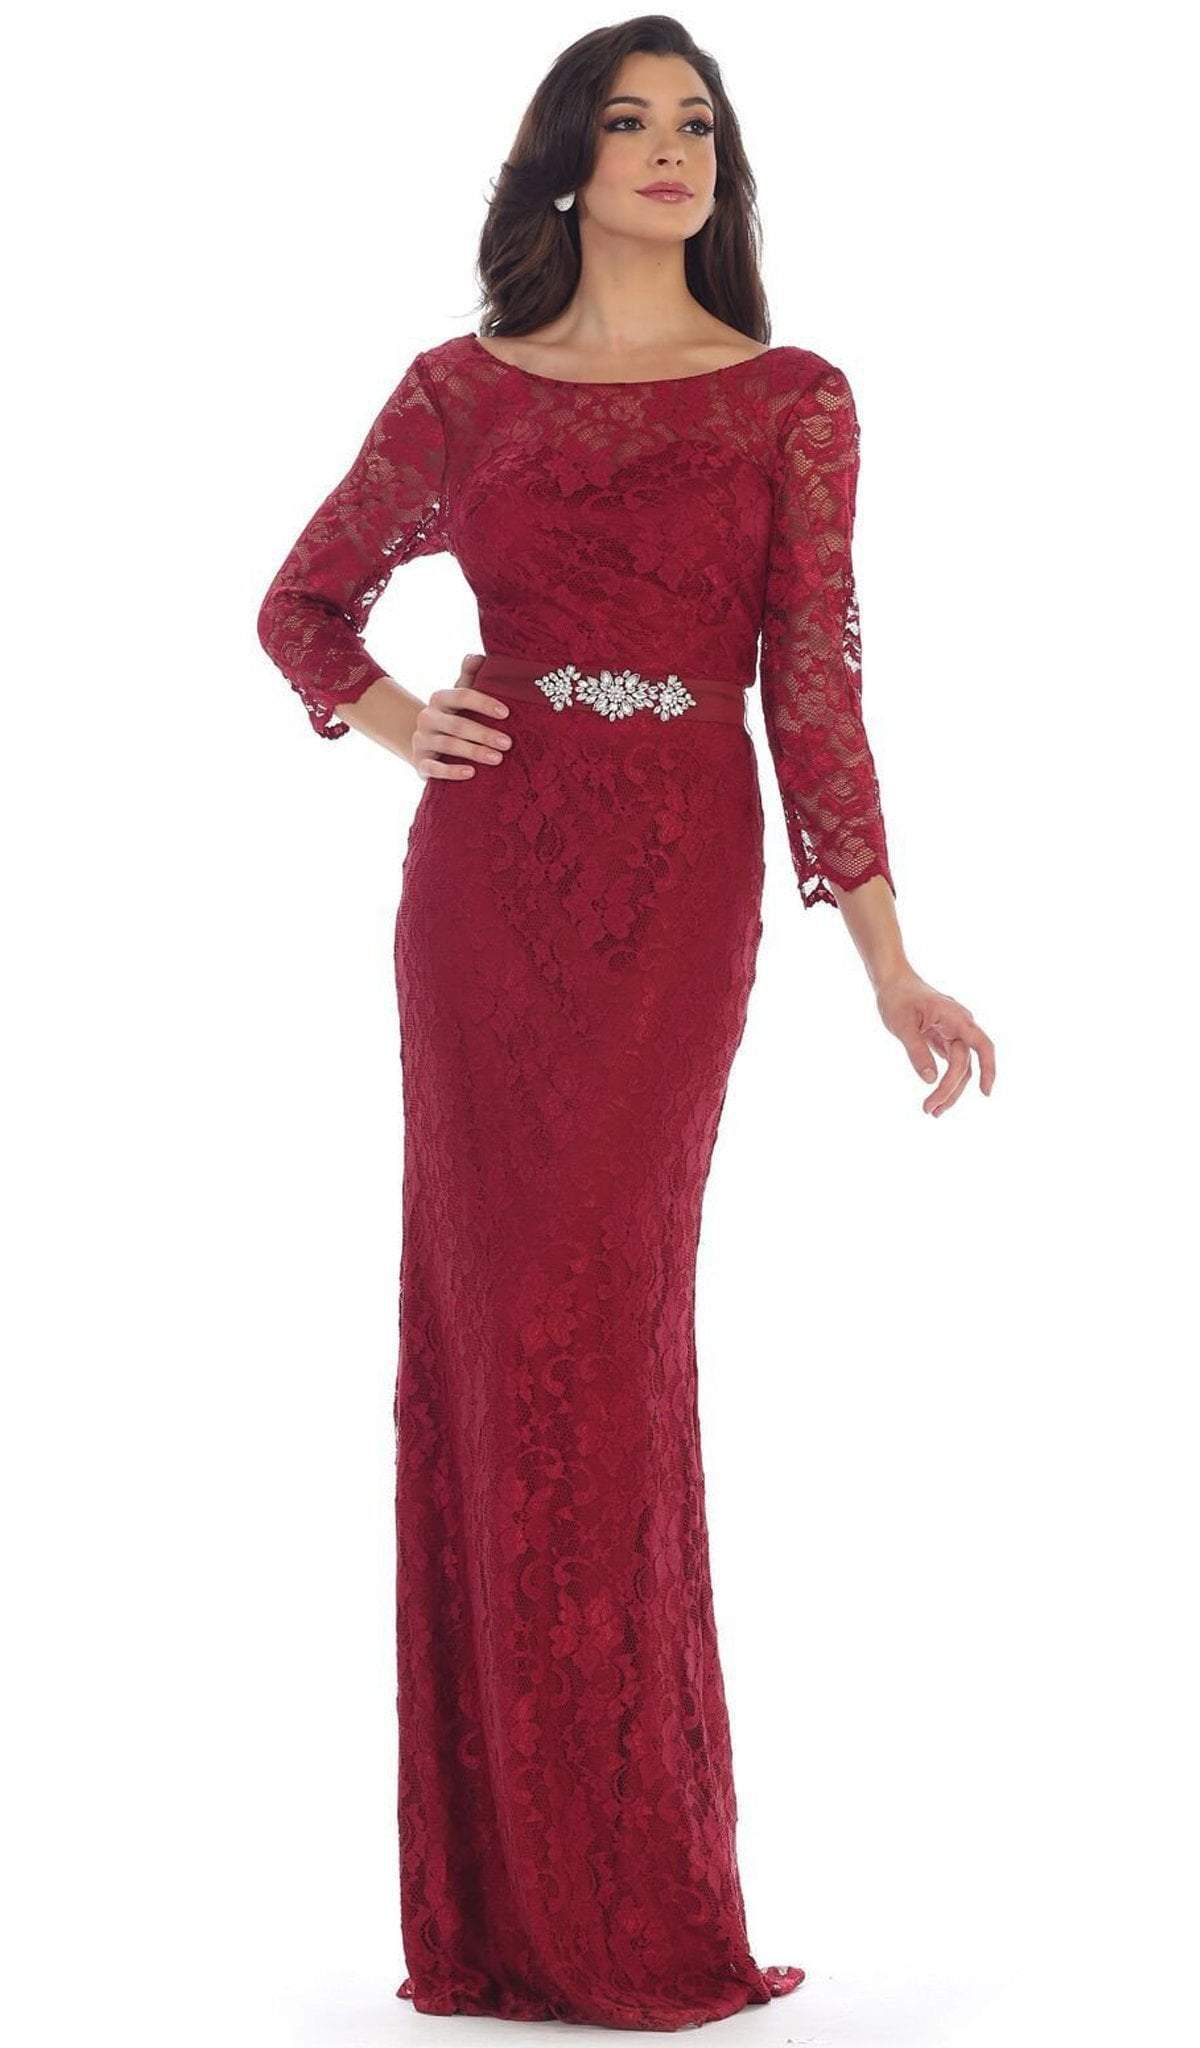 May Queen - Lace Illusion Bateau Sheath Mother of the Bride Dress ...